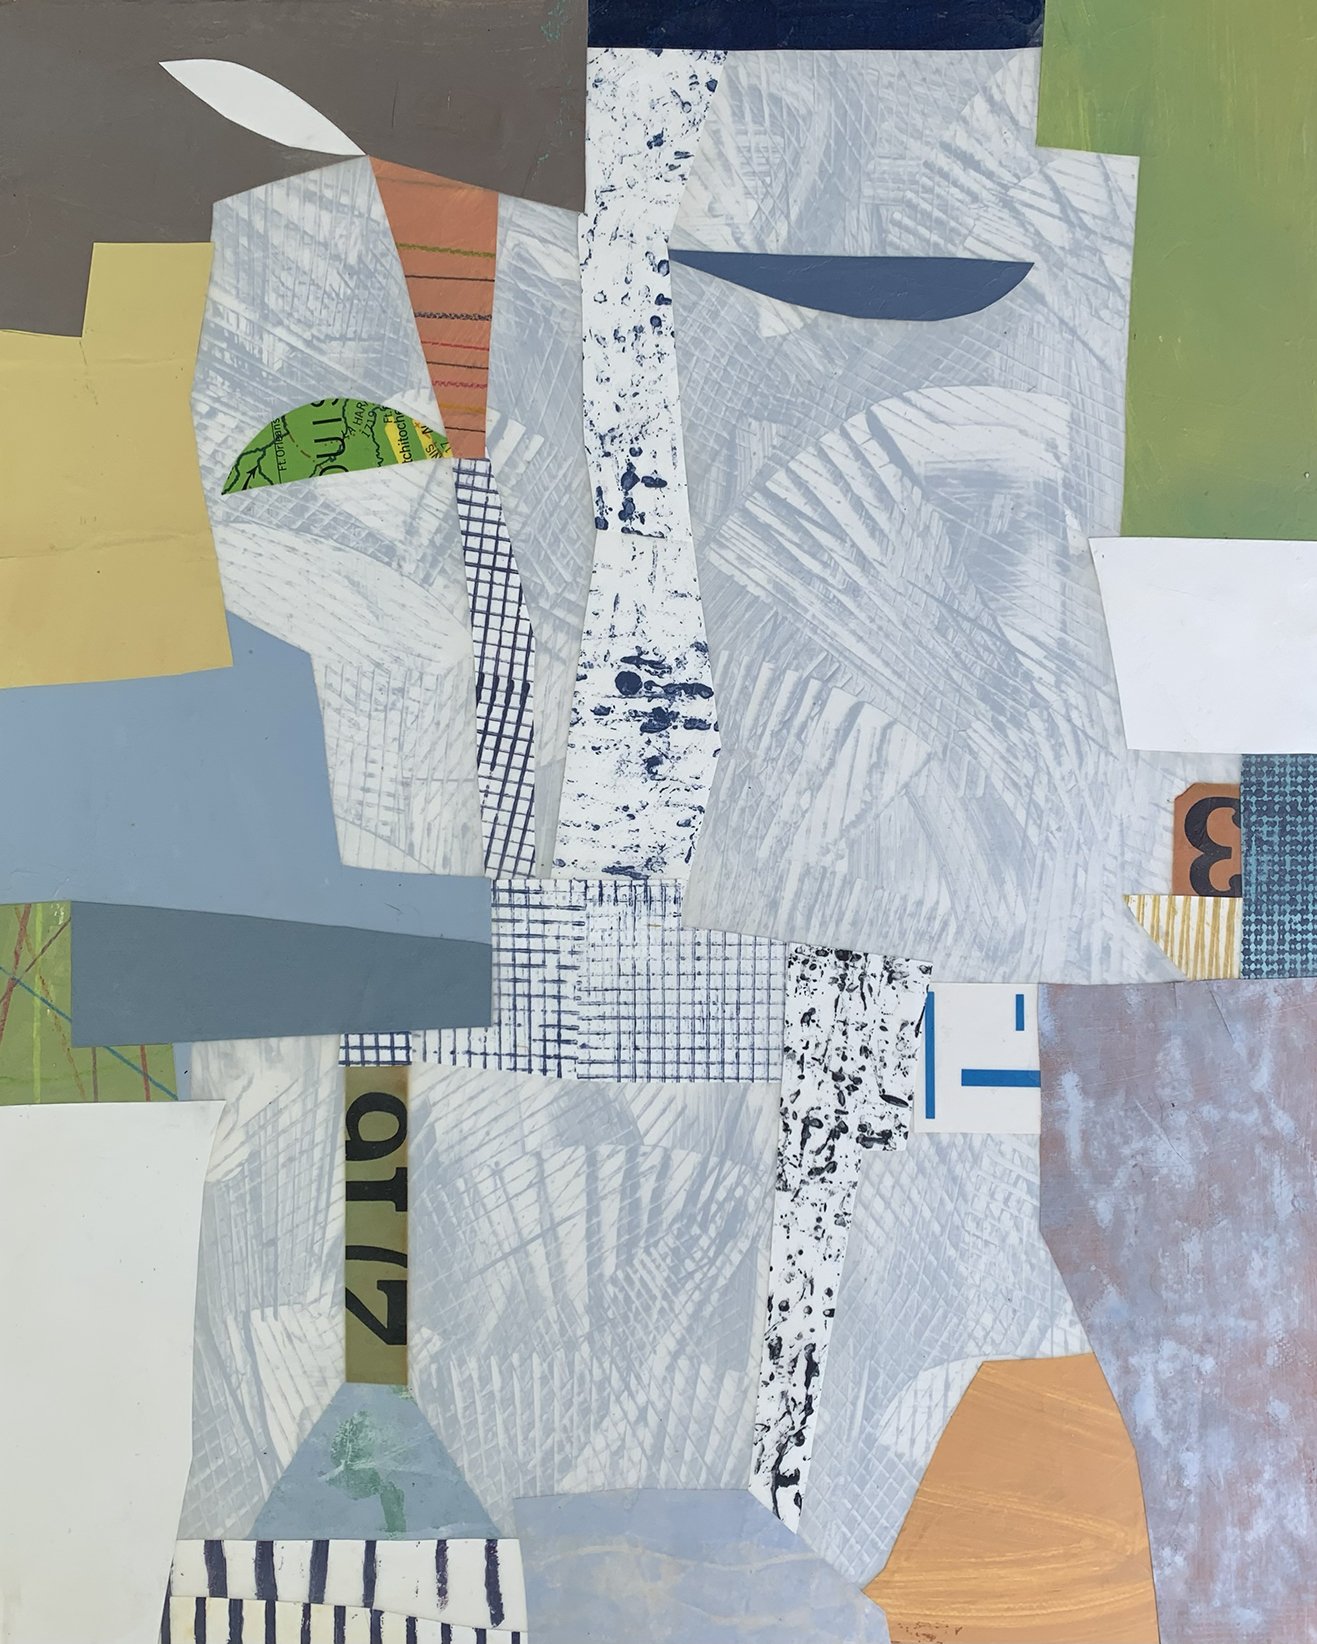   Plant Growing Between Buildings No. 1   24 inches by 30 inches  acrylic/mixed media on panel   2022 